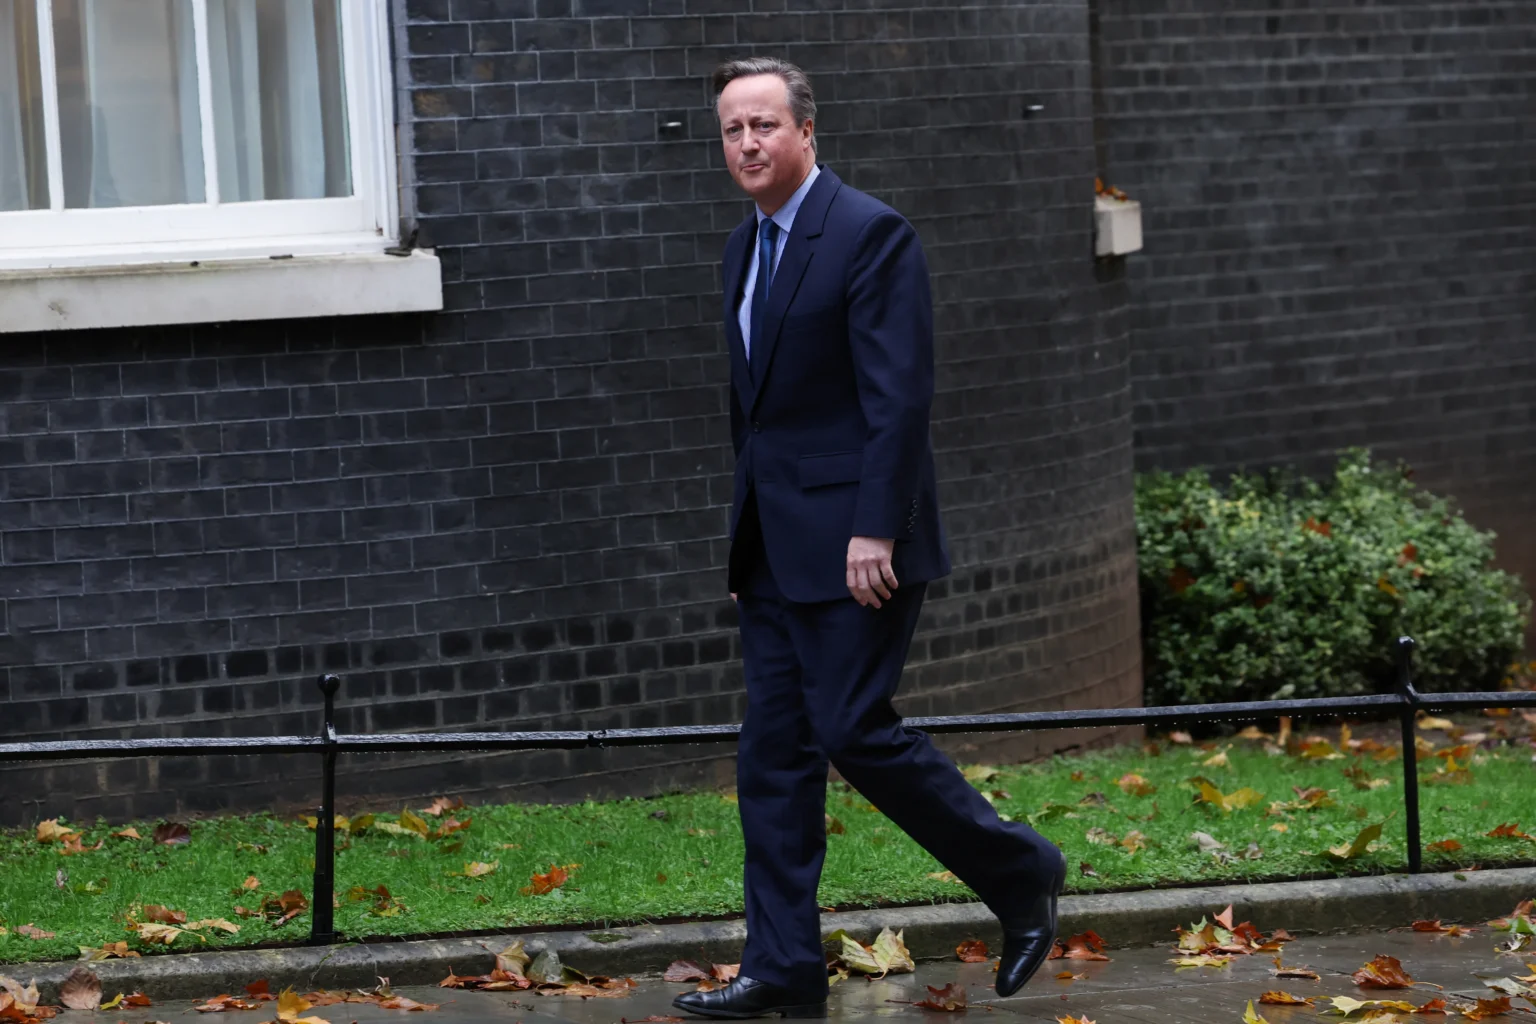 Reshuffle Day: Former PM David Cameron is the new foreign secretary